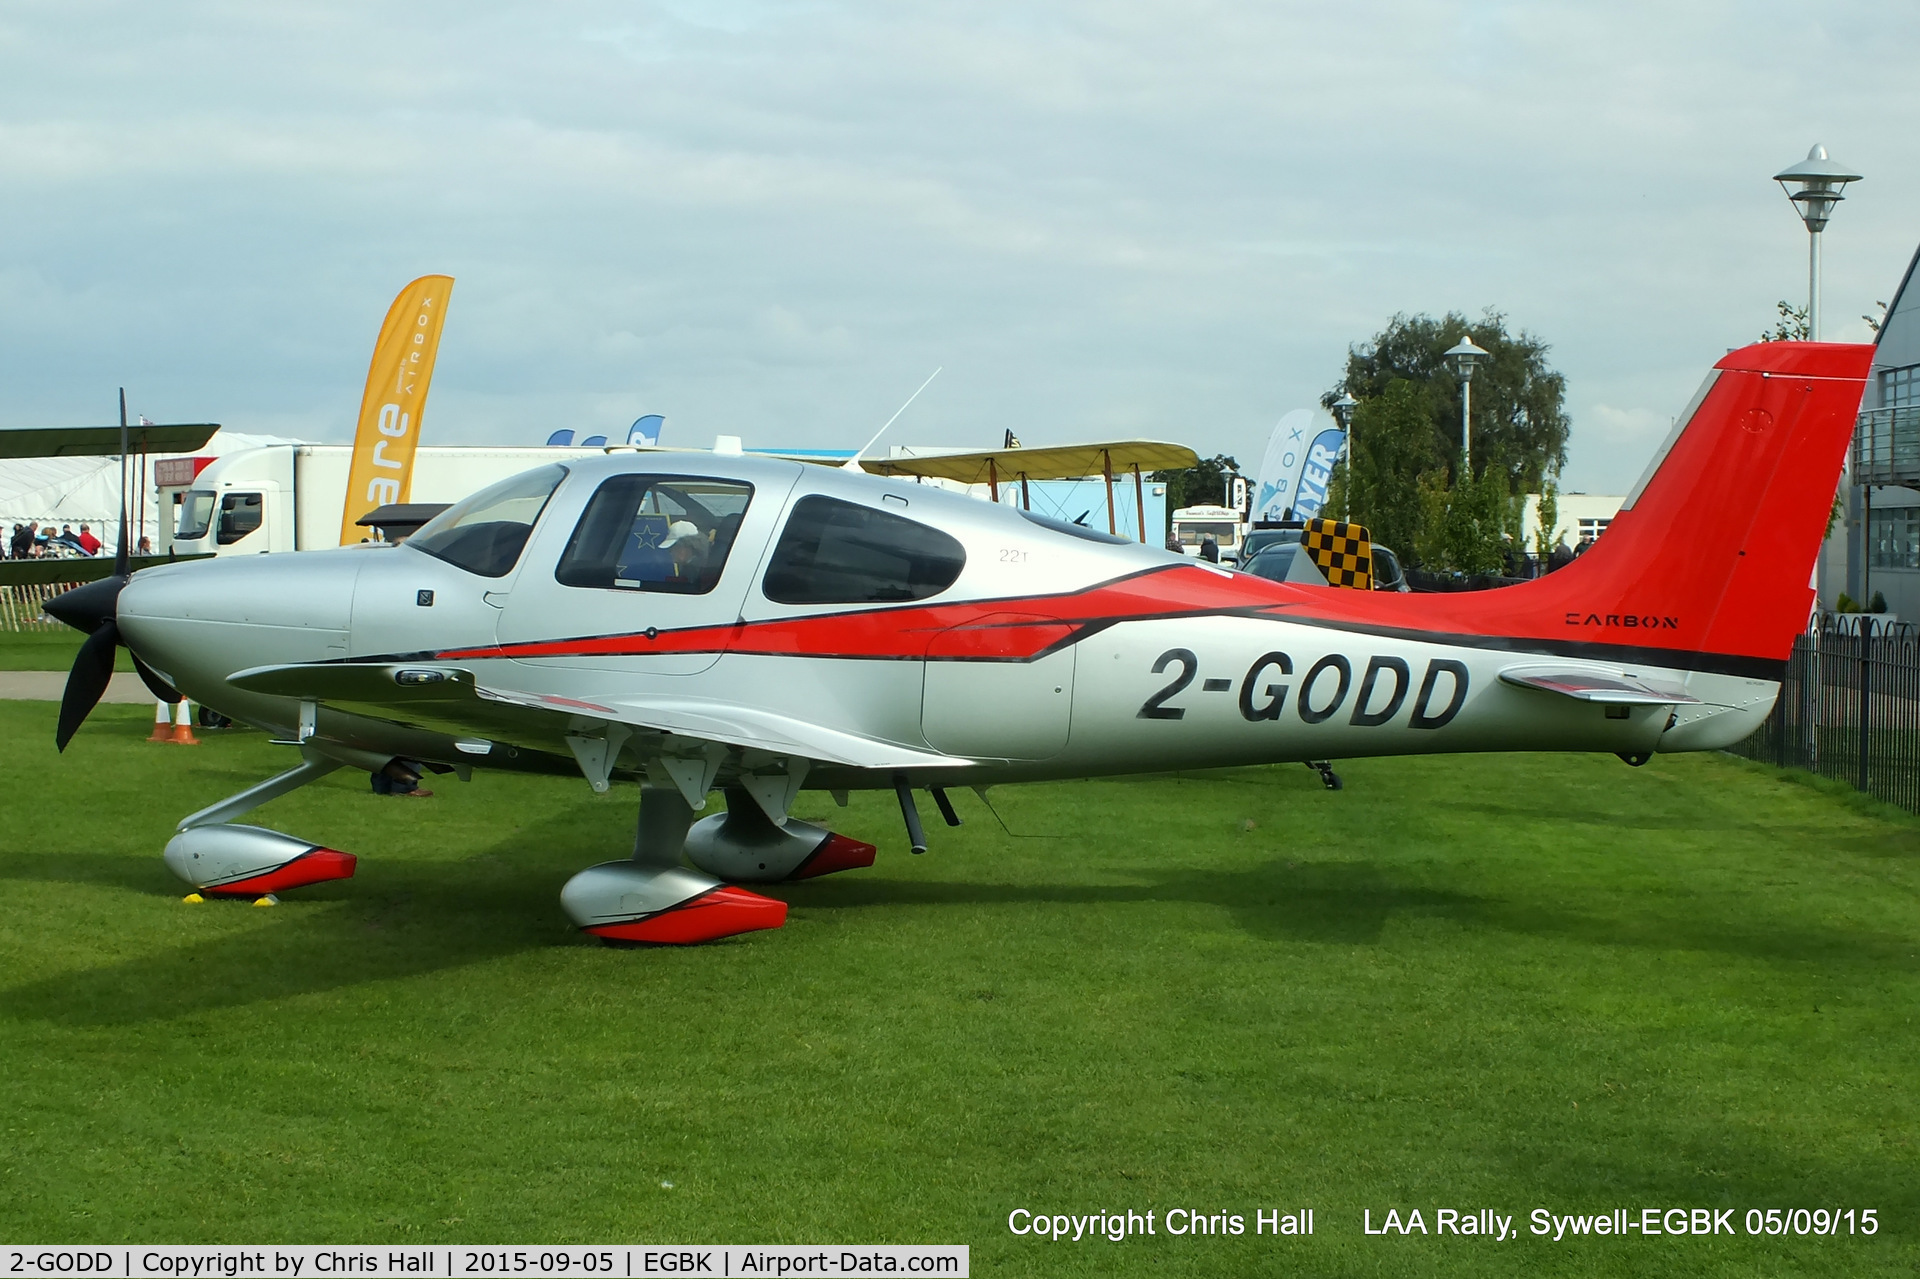 2-GODD, 2015 Cirrus SR22T Perspective G5 C/N 1070, at the LAA Rally 2015, Sywell